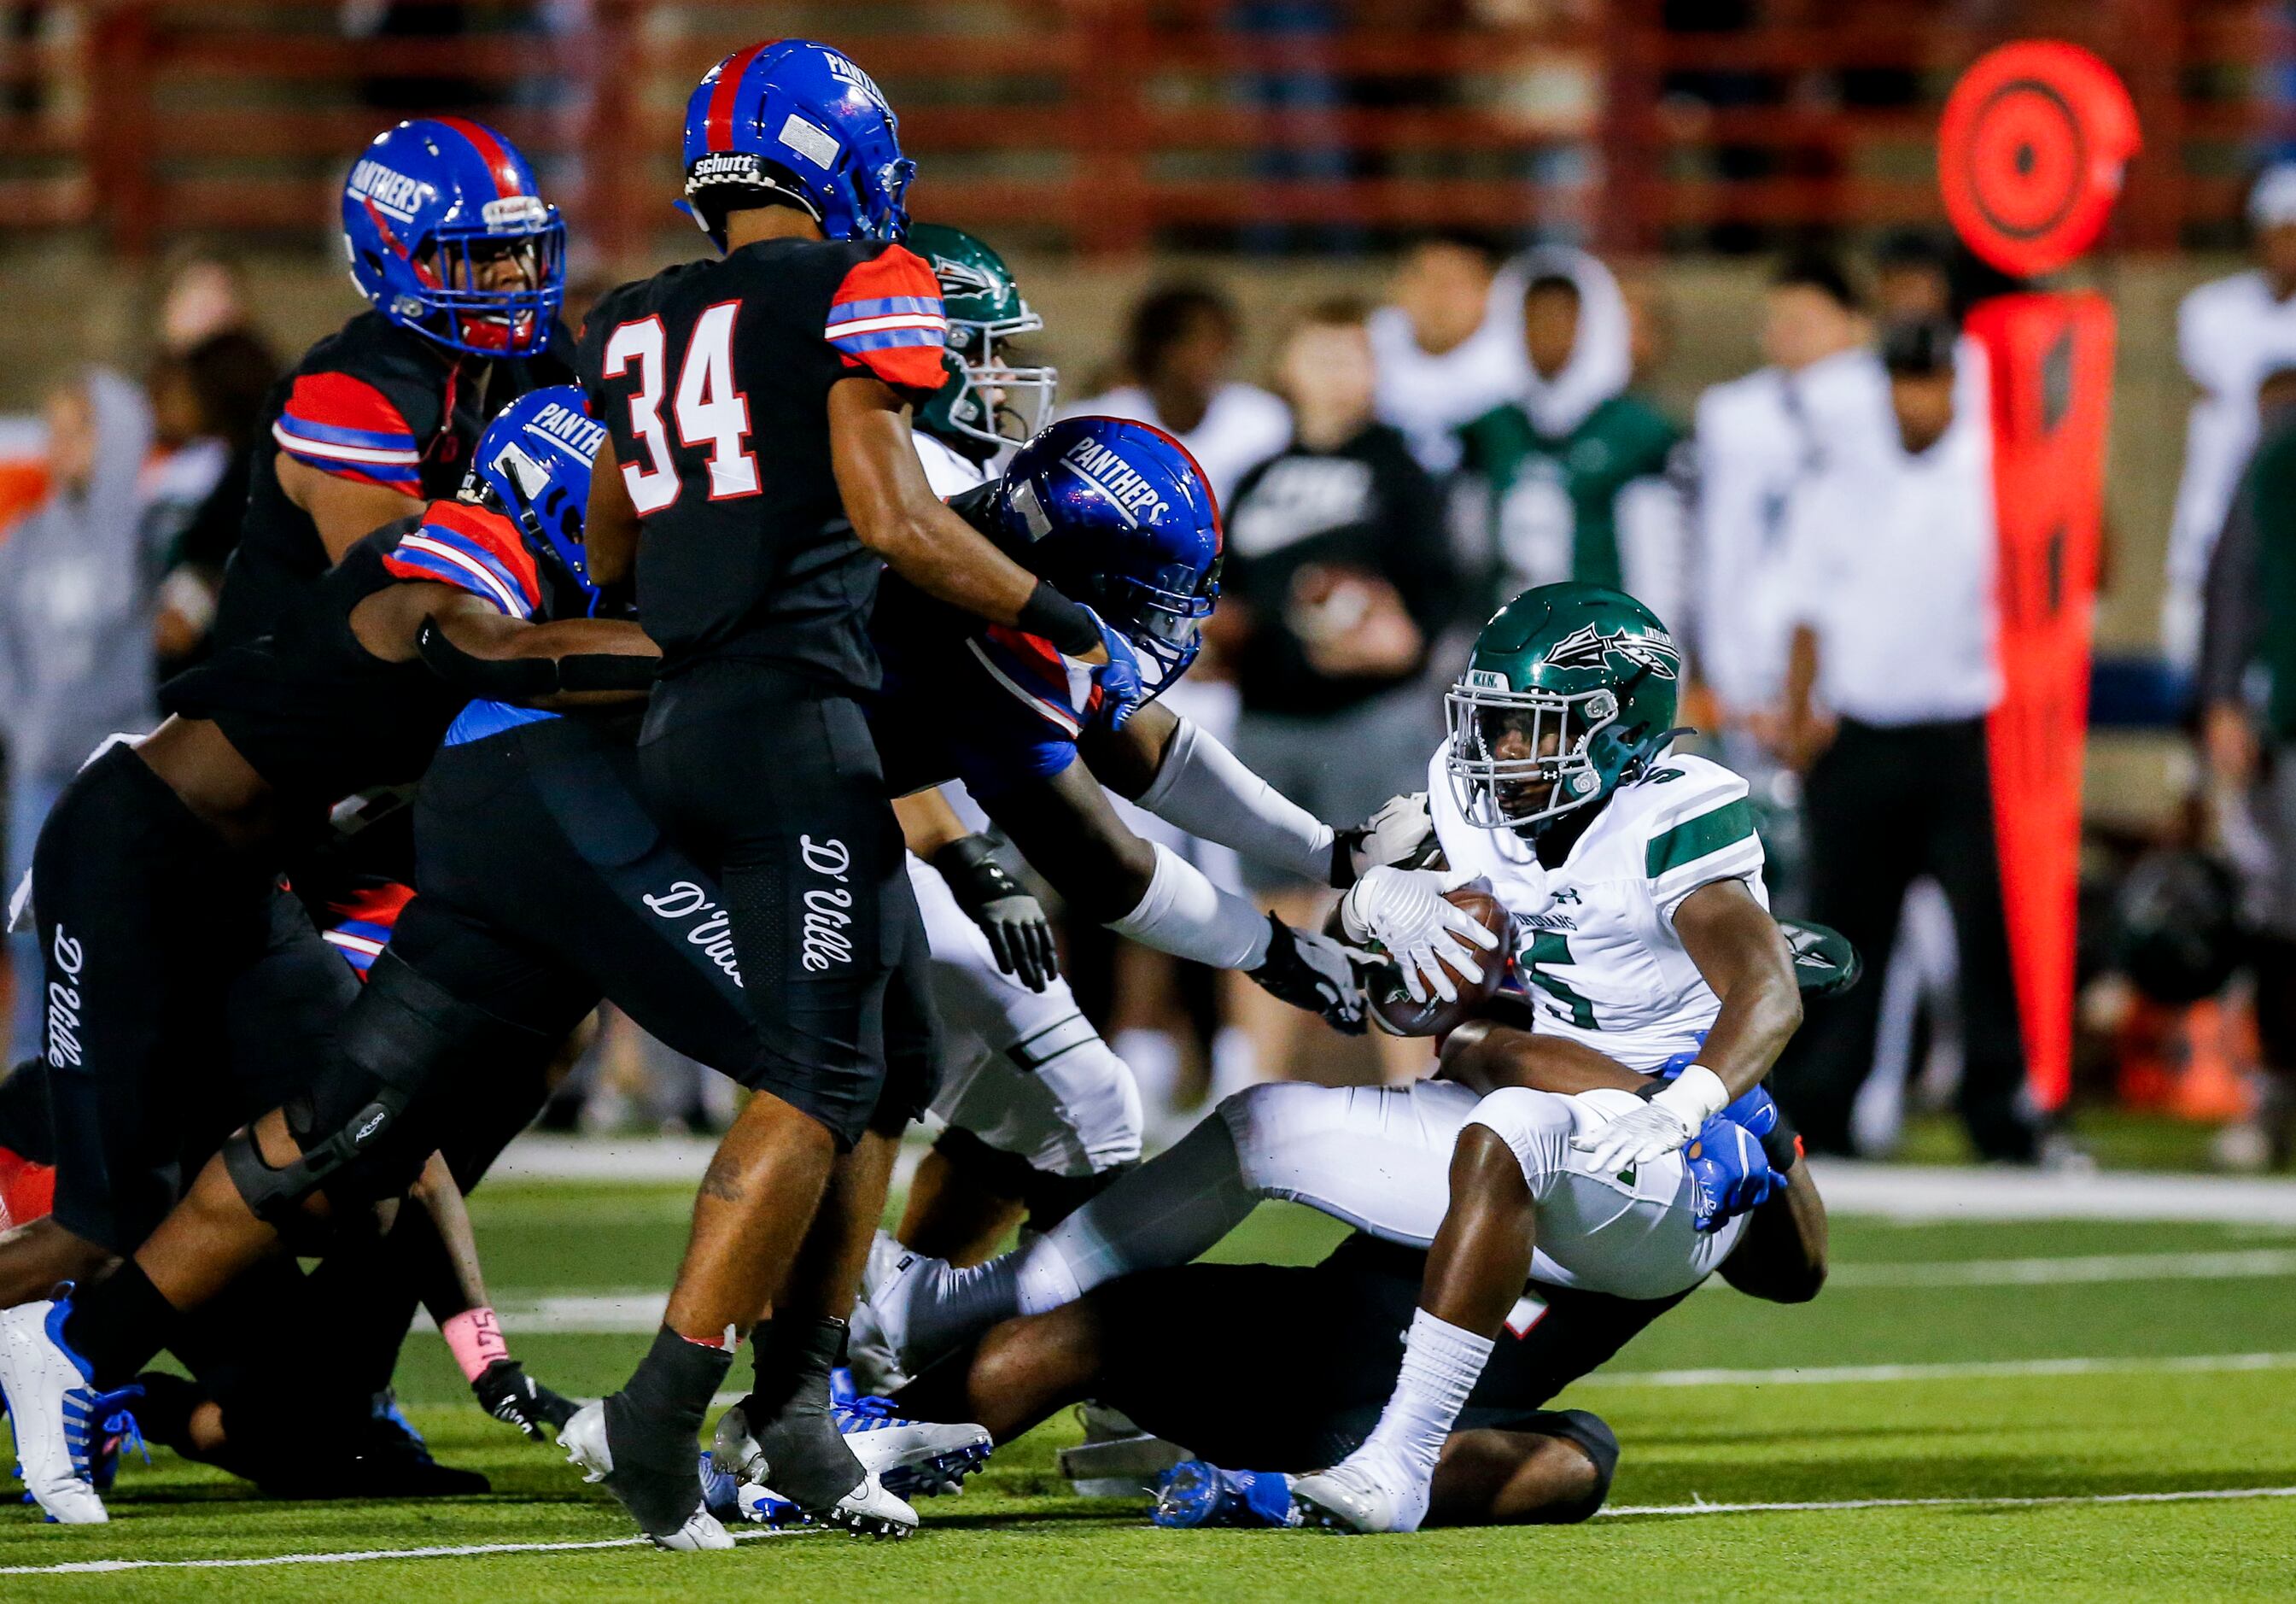 Waxahachie junior running back Jayden Becks (5) is tackled by the Duncanville defense during...